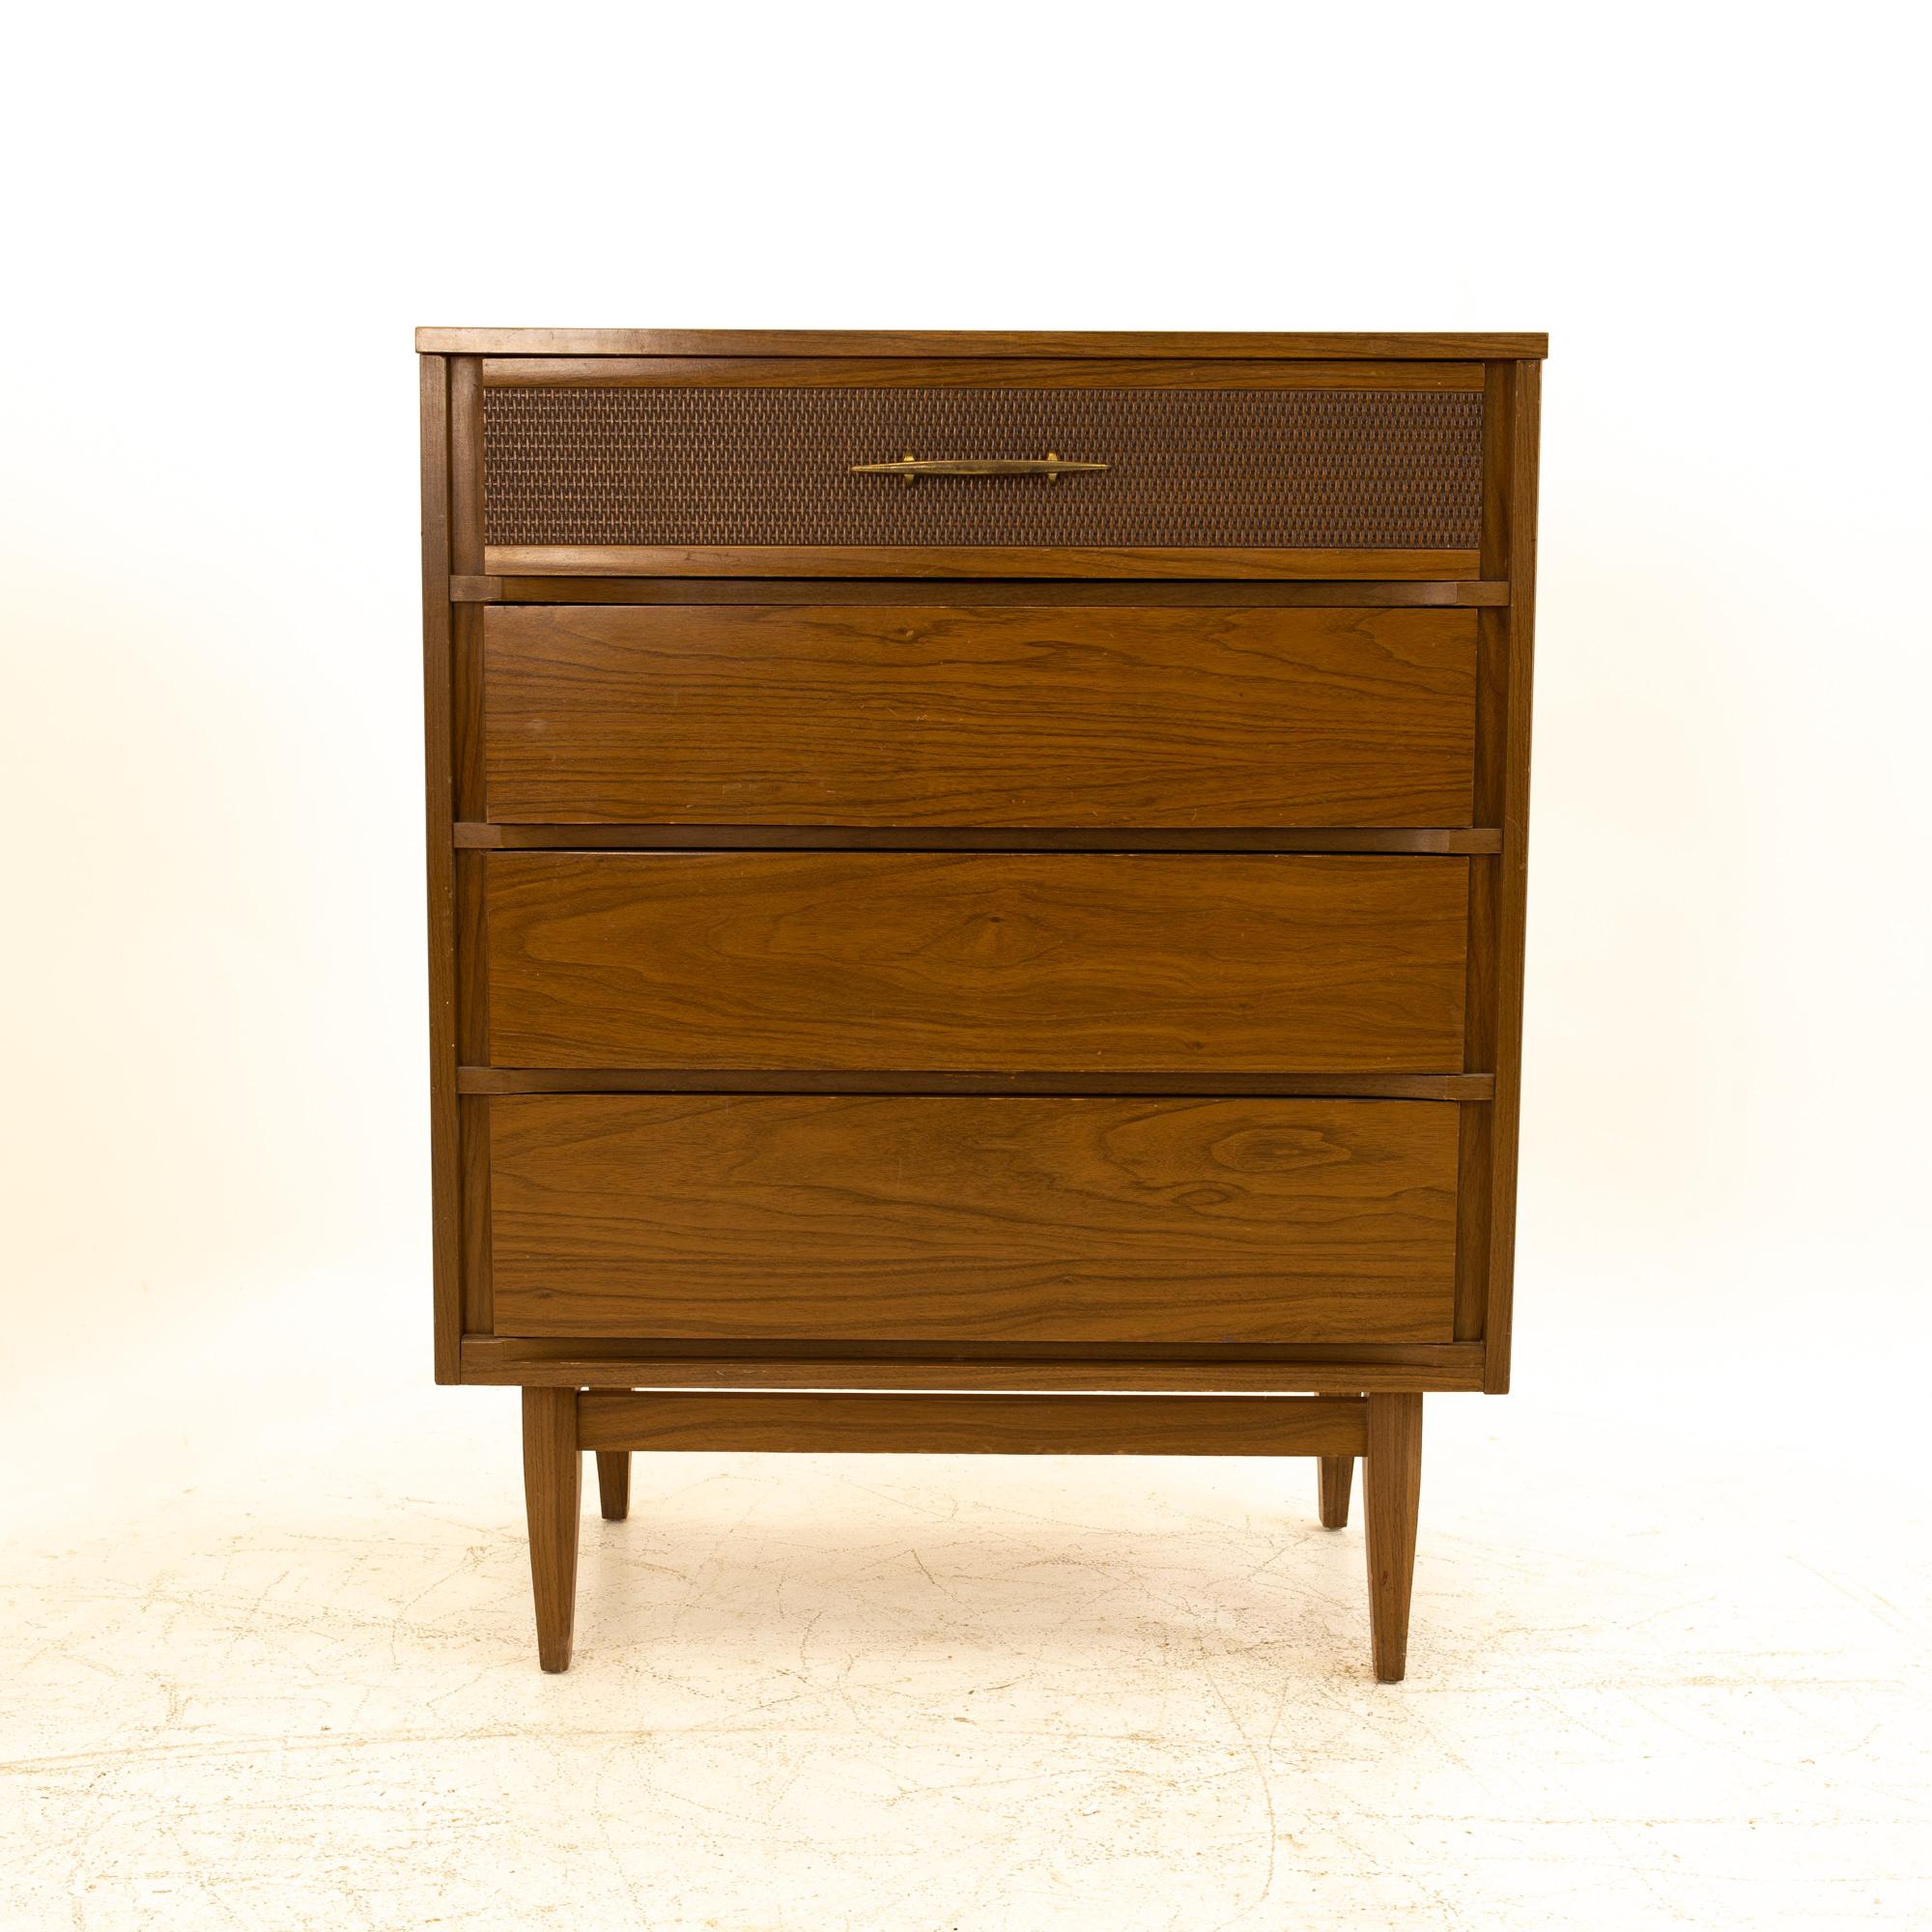 Kroehler Mid Century Walnut 4 Drawer Highboy Dresser
Highboy measures: 33.5 wide x 18 deep x 42 high

All pieces of furniture can be had in what we call Restored Vintage Condition. That means the piece is restored upon purchase so it’s free of